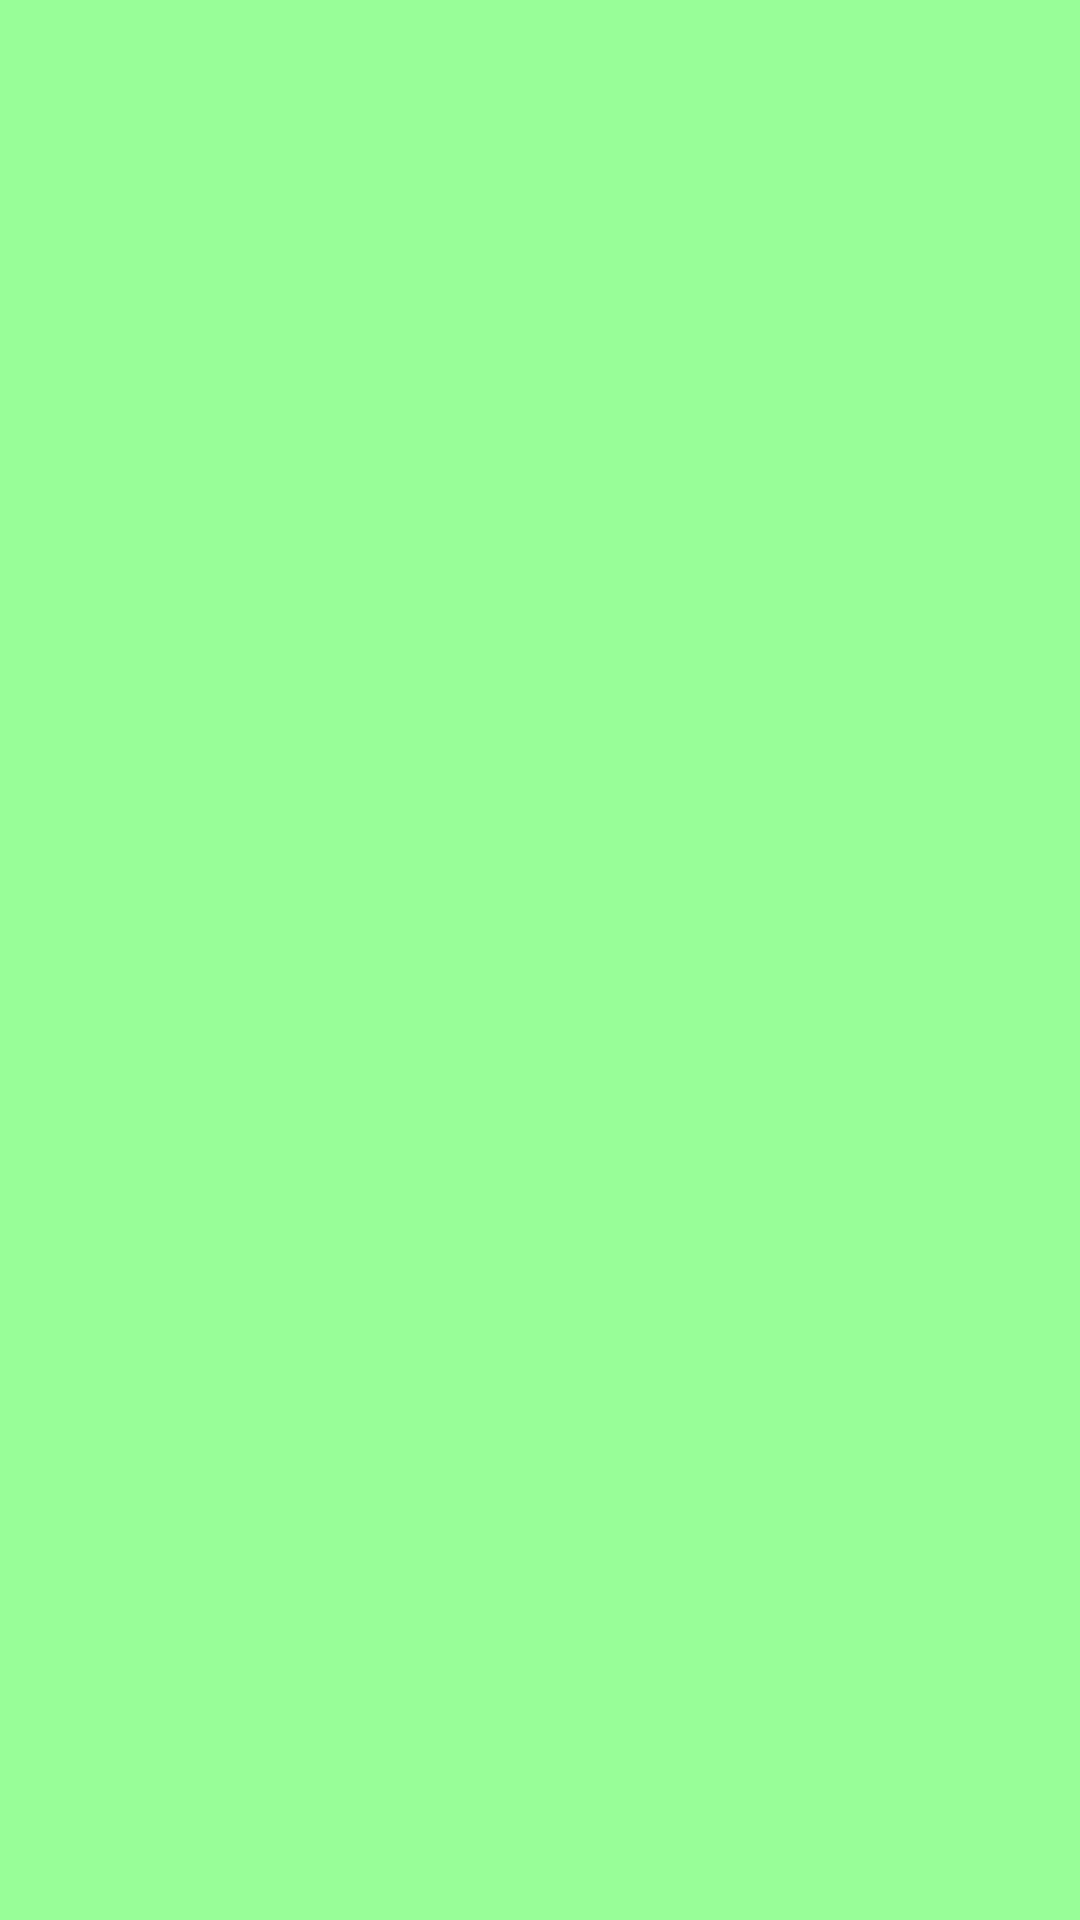 iPhone X Wallpaper Light Green with image resolution 1080x1920 pixel. You can make this wallpaper for your iPhone 5, 6, 7, 8, X backgrounds, Mobile Screensaver, or iPad Lock Screen